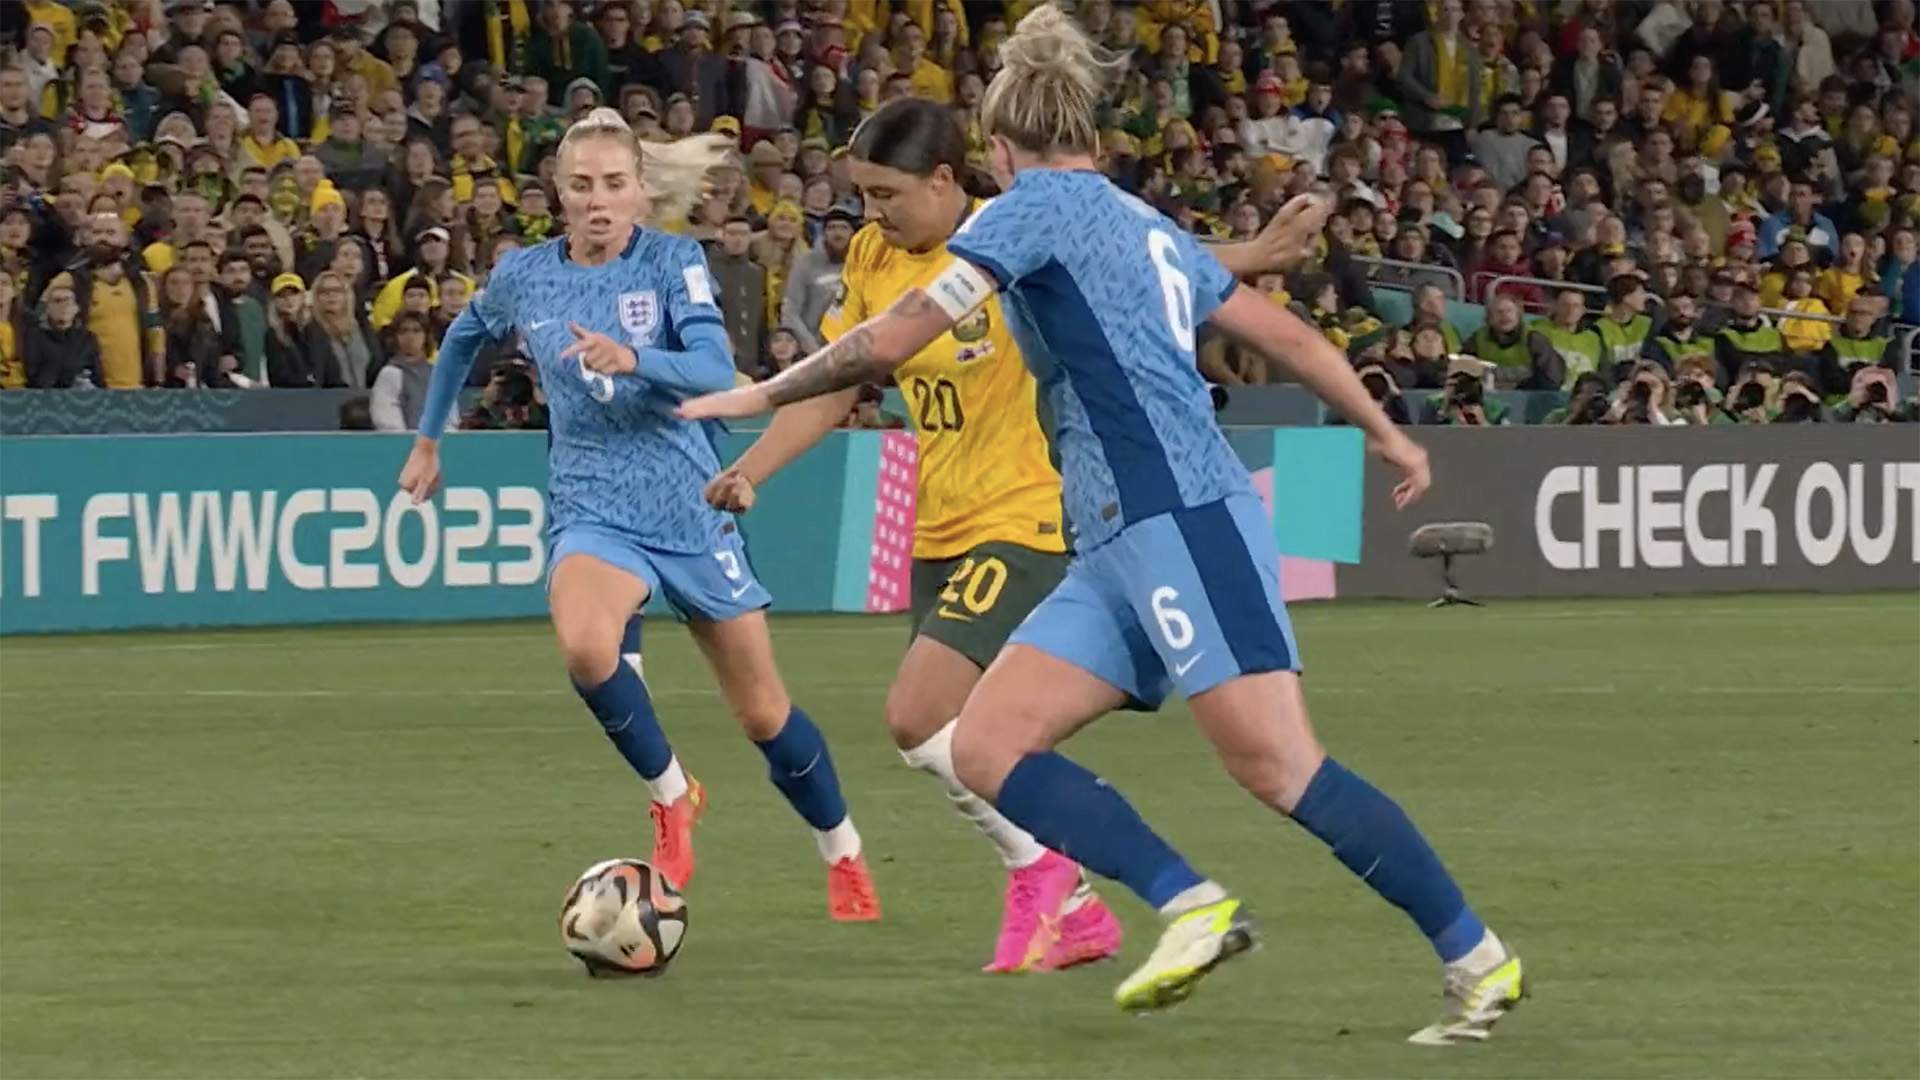 You Can Vote for Sam Kerr's Stunning Goal as the Women's World Cup's Best to Give the Matildas Another Win